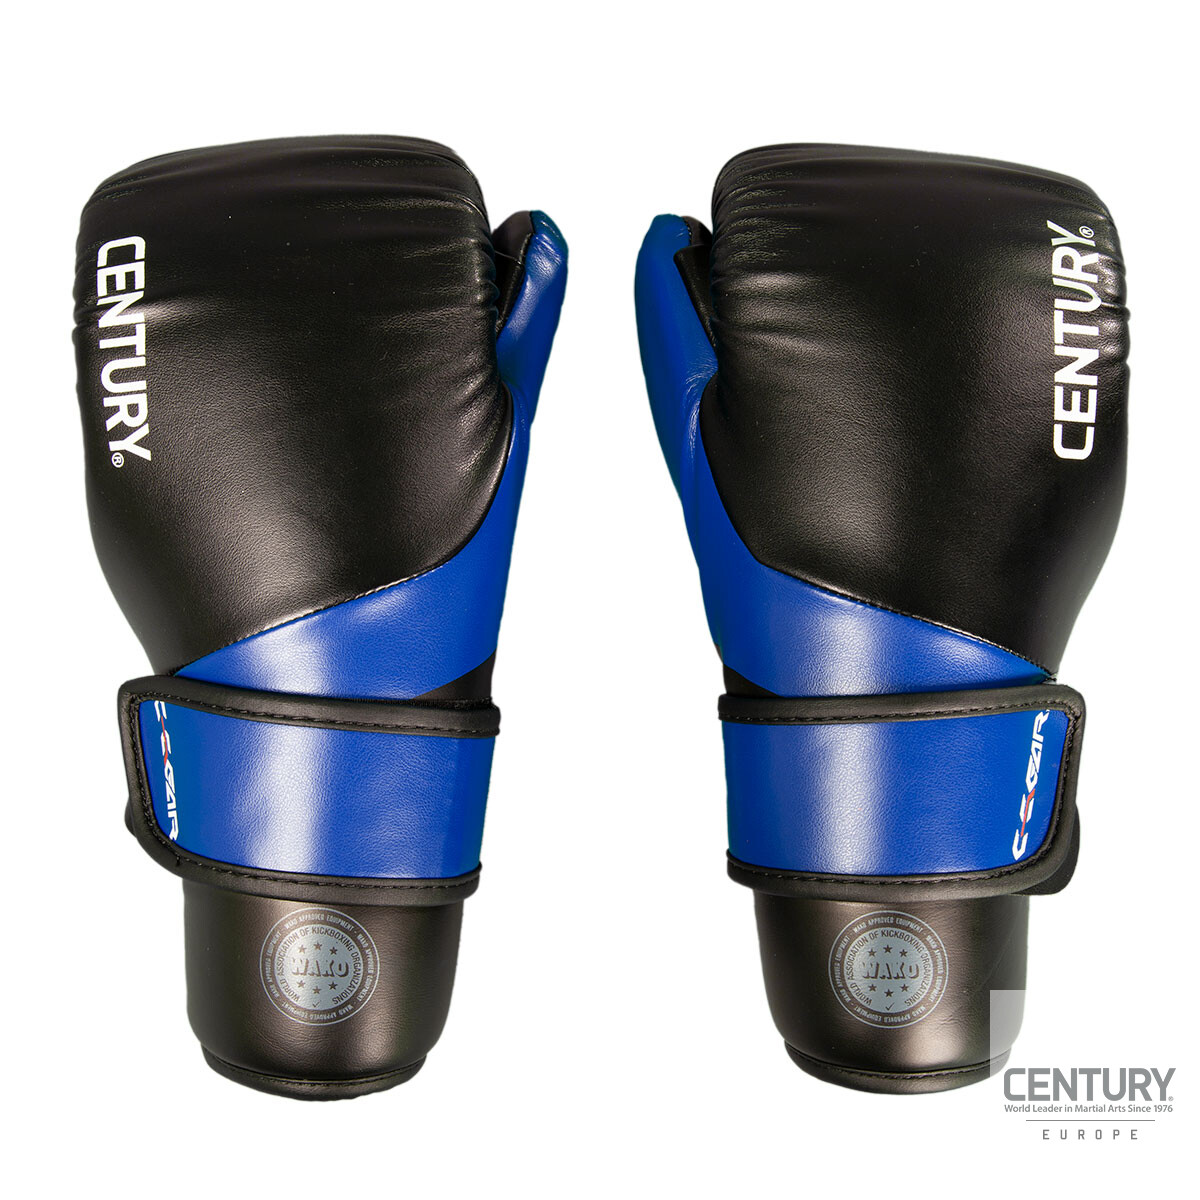 Point Fighting Gloves C-GEAR Determination WAKO approved...